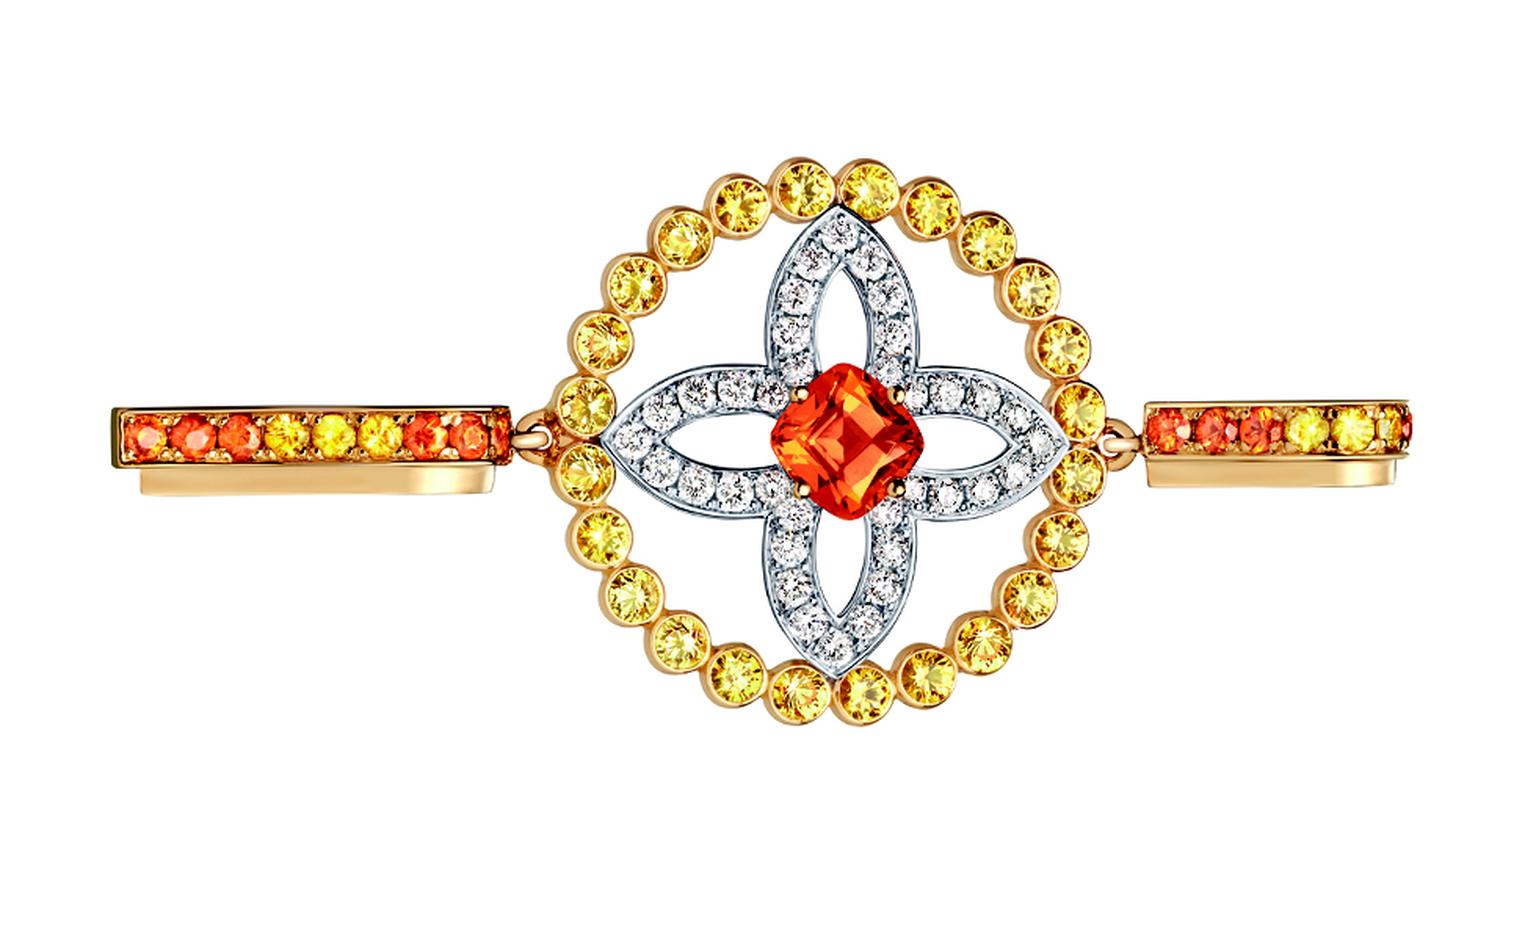 LOUIS VUITTON, Large Ornament Tribal Pendent, yellow gold, yellow sapphires, spessartite garnets and diamonds. £8,400